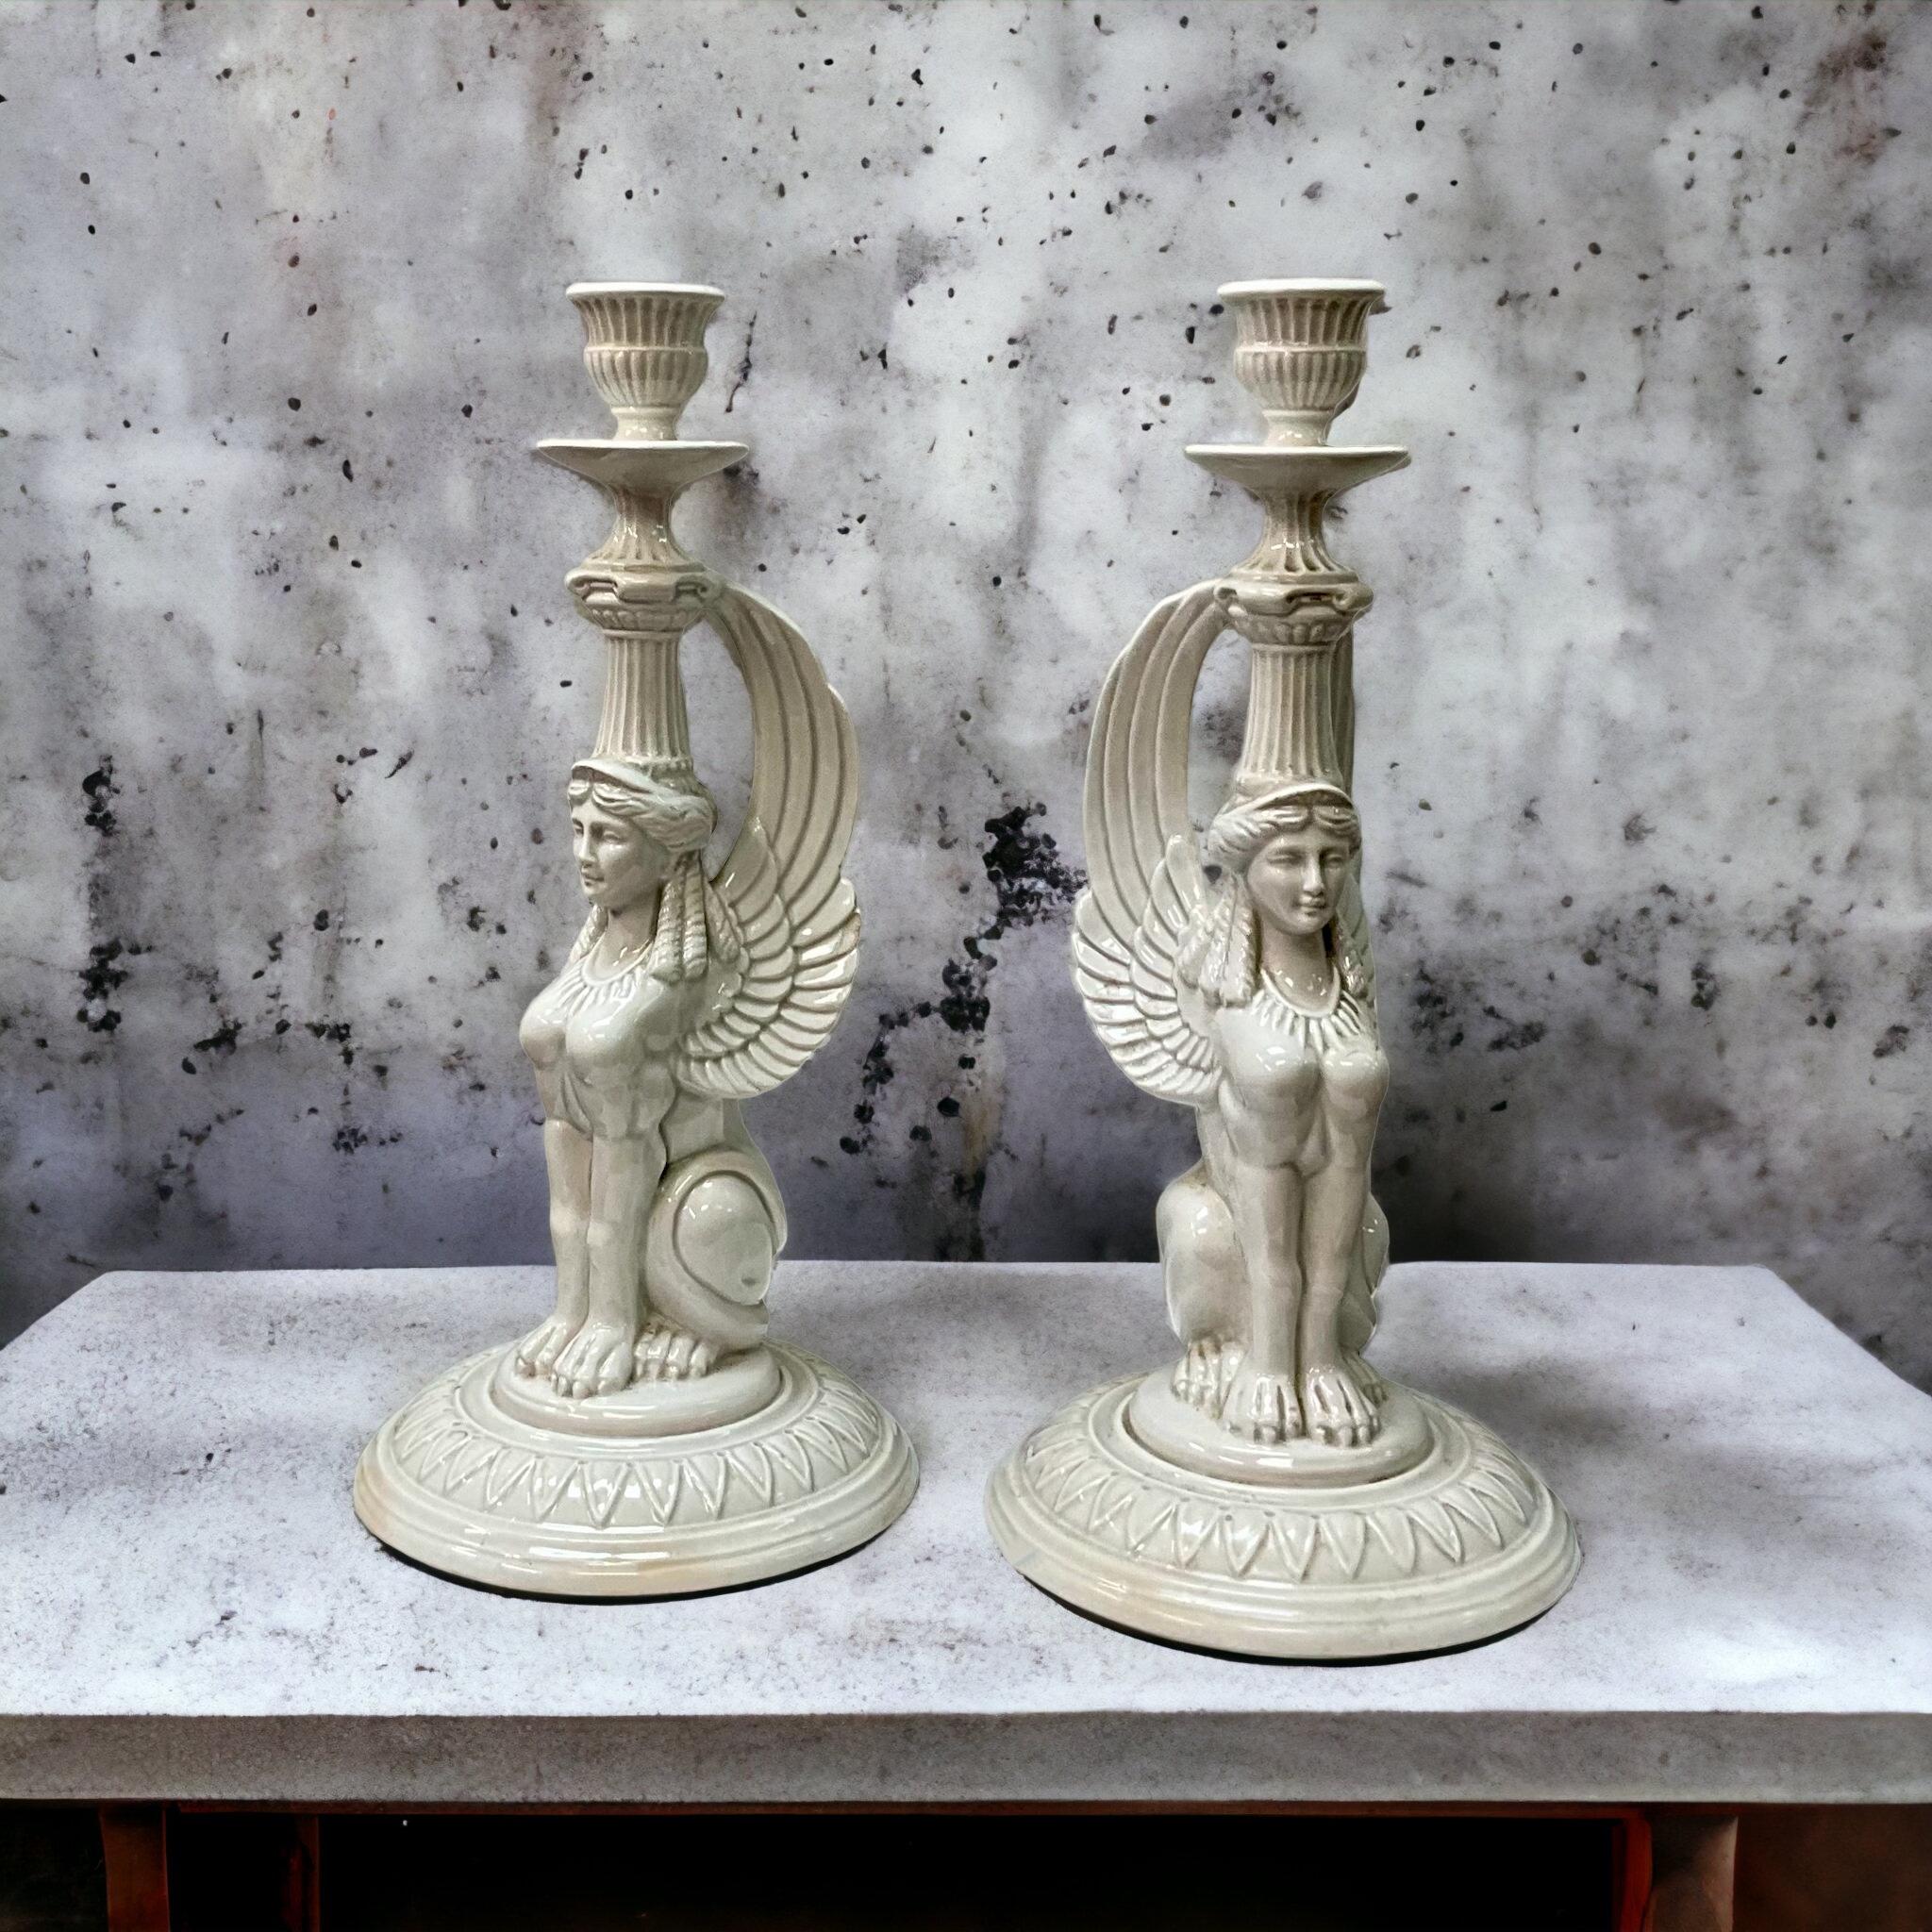 This is a pair of Egyptian Revival style Fitz and Floyd white porcelain candlesticks. They date to the 70s and were crafted in Japan. They are marked. 